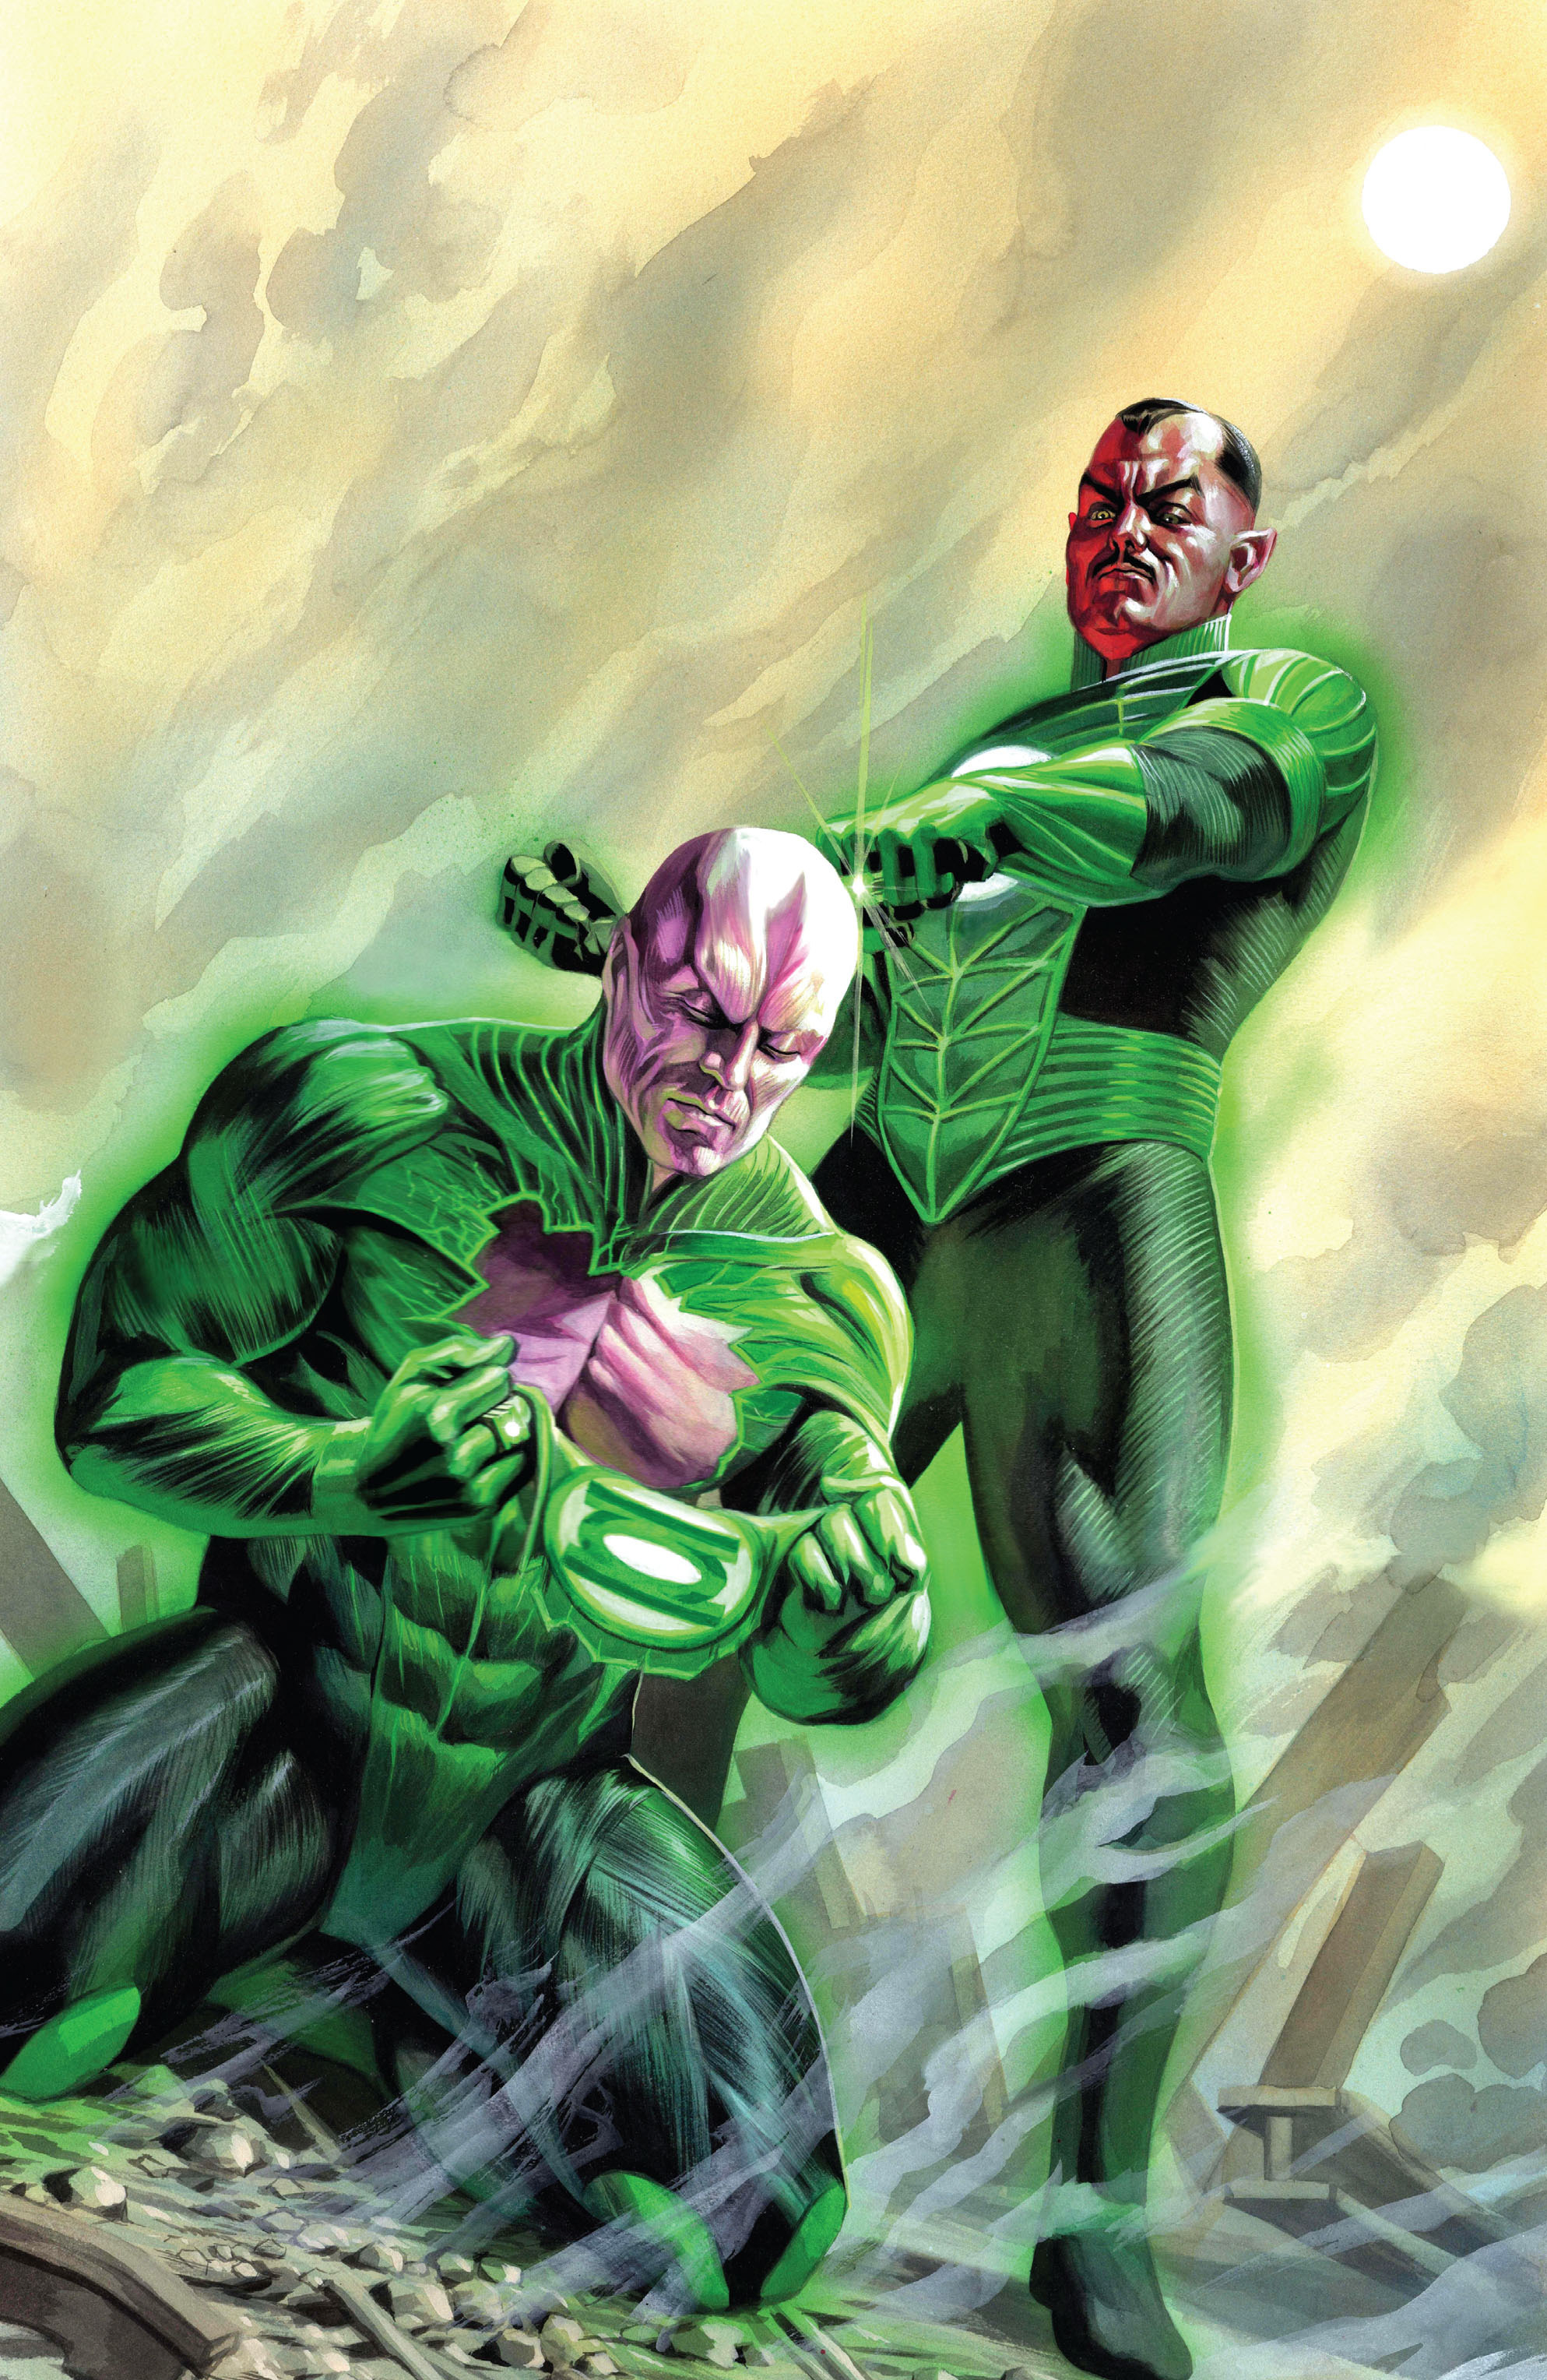 Flashpoint: The World of Flashpoint Featuring Green Lantern Full #1 - English 25